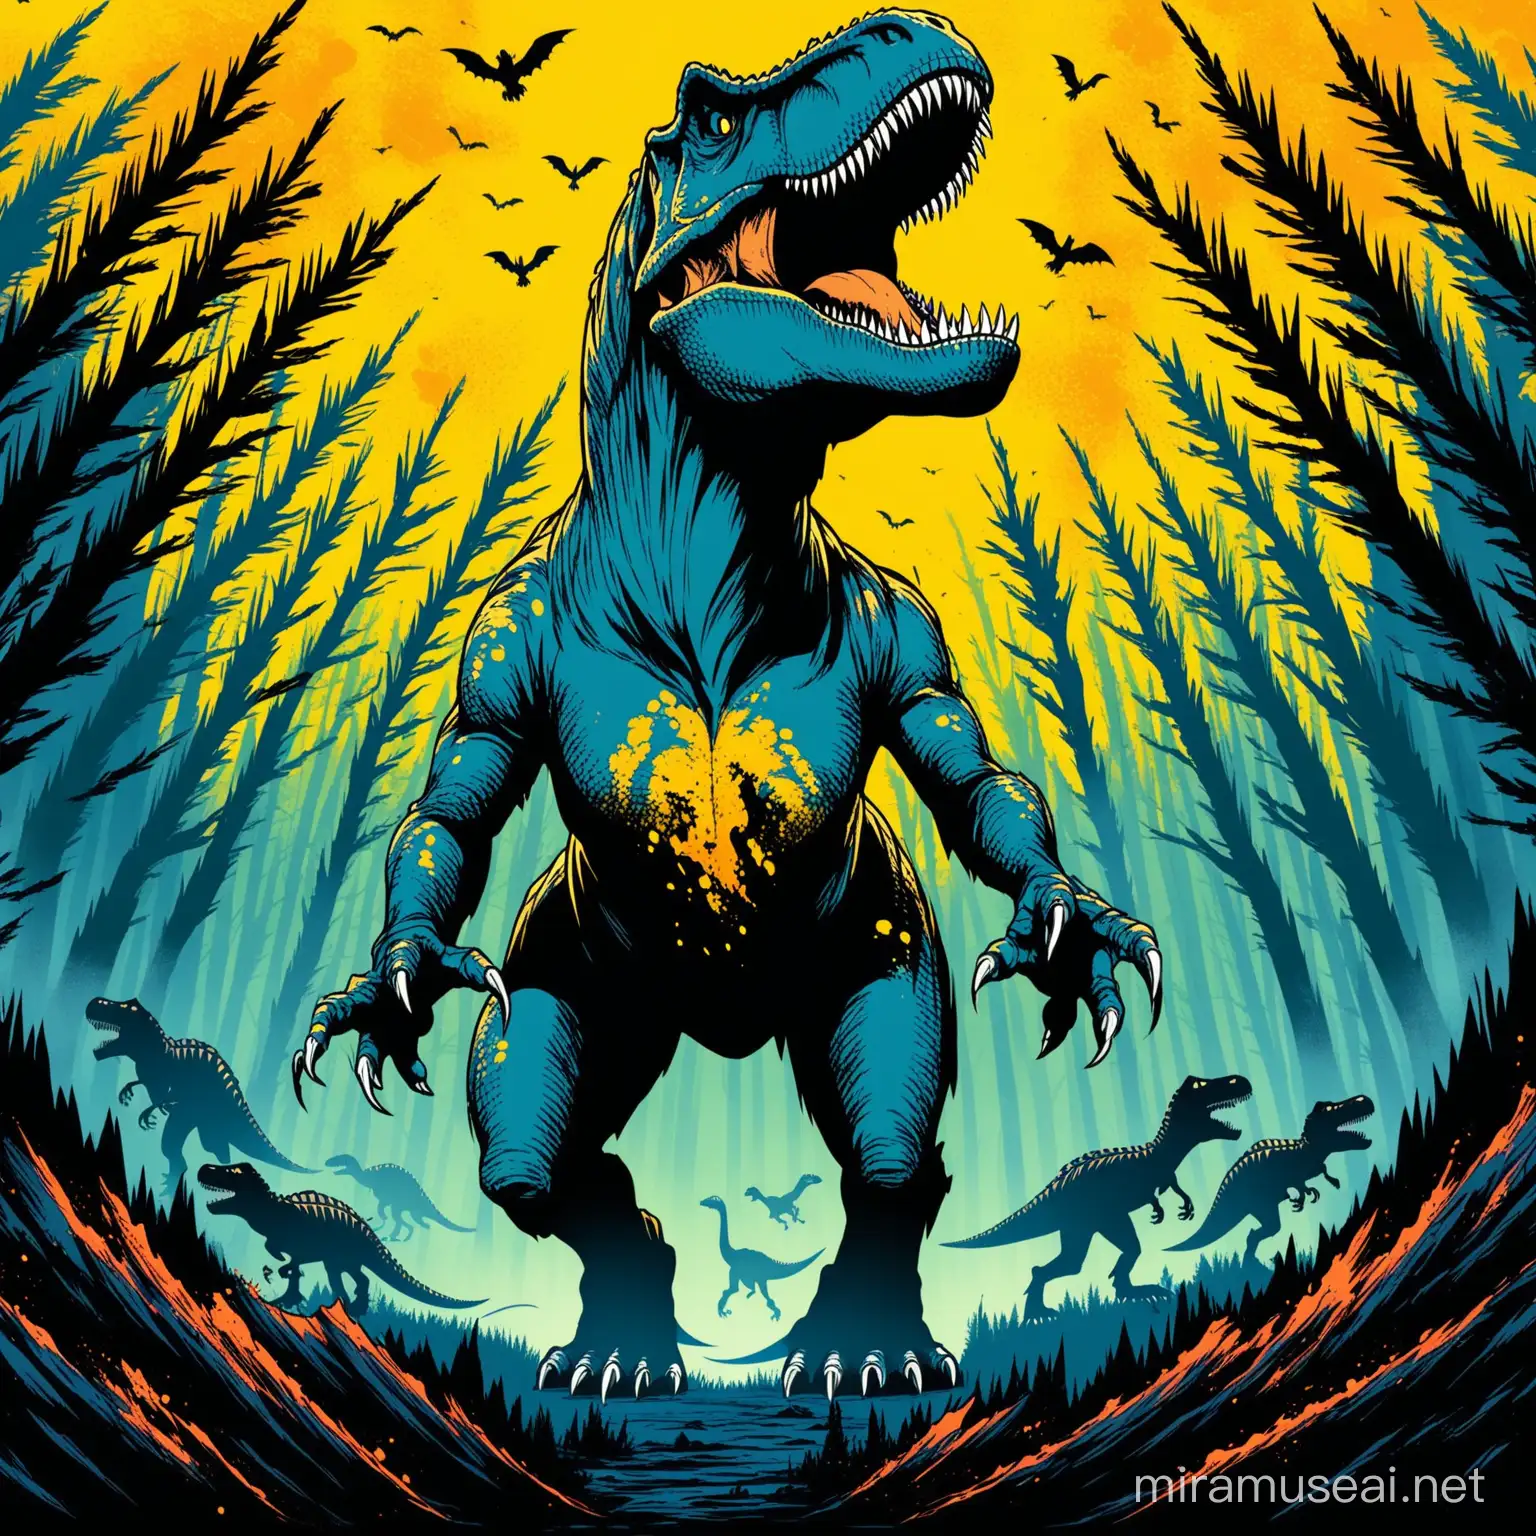 T-rex with hand-print over body
appreance-full body/ scary/ roaring/ yellow and blue hand-print
background- volcano-noir/ forest/ dead animals